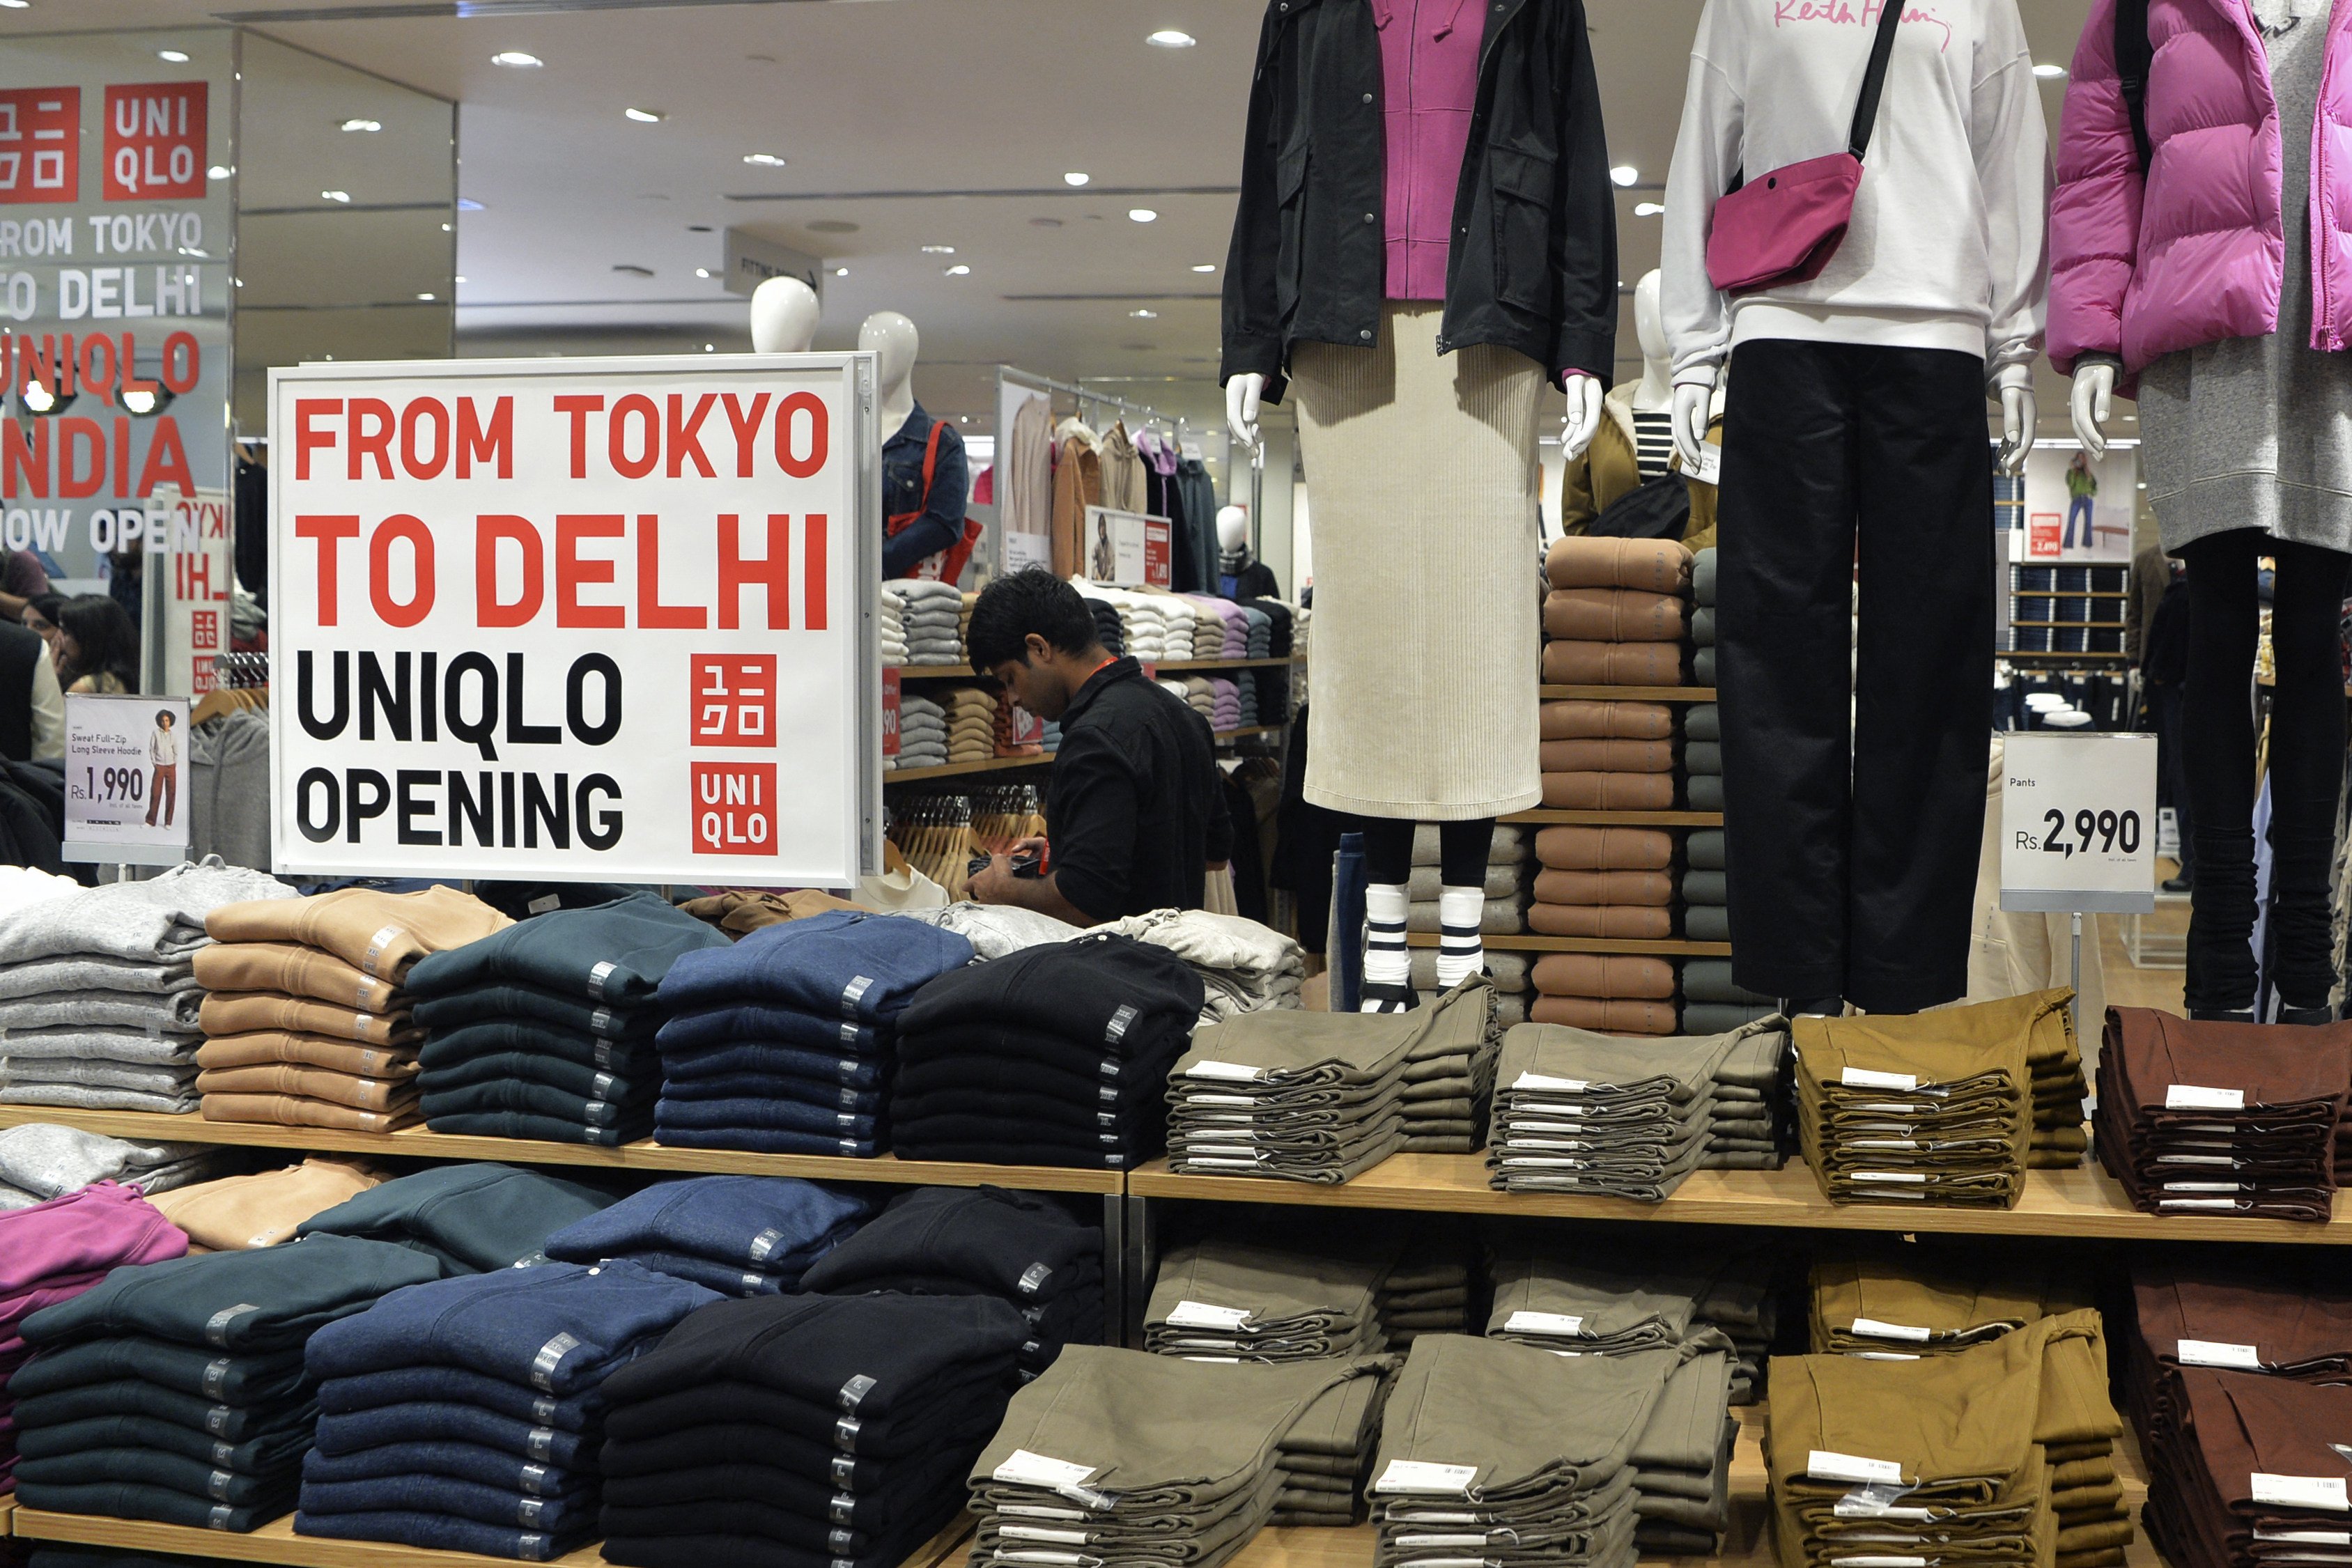 uniqlo india: Japan's Uniqlo to expand to Mumbai, plans to open first store  in October - The Economic Times